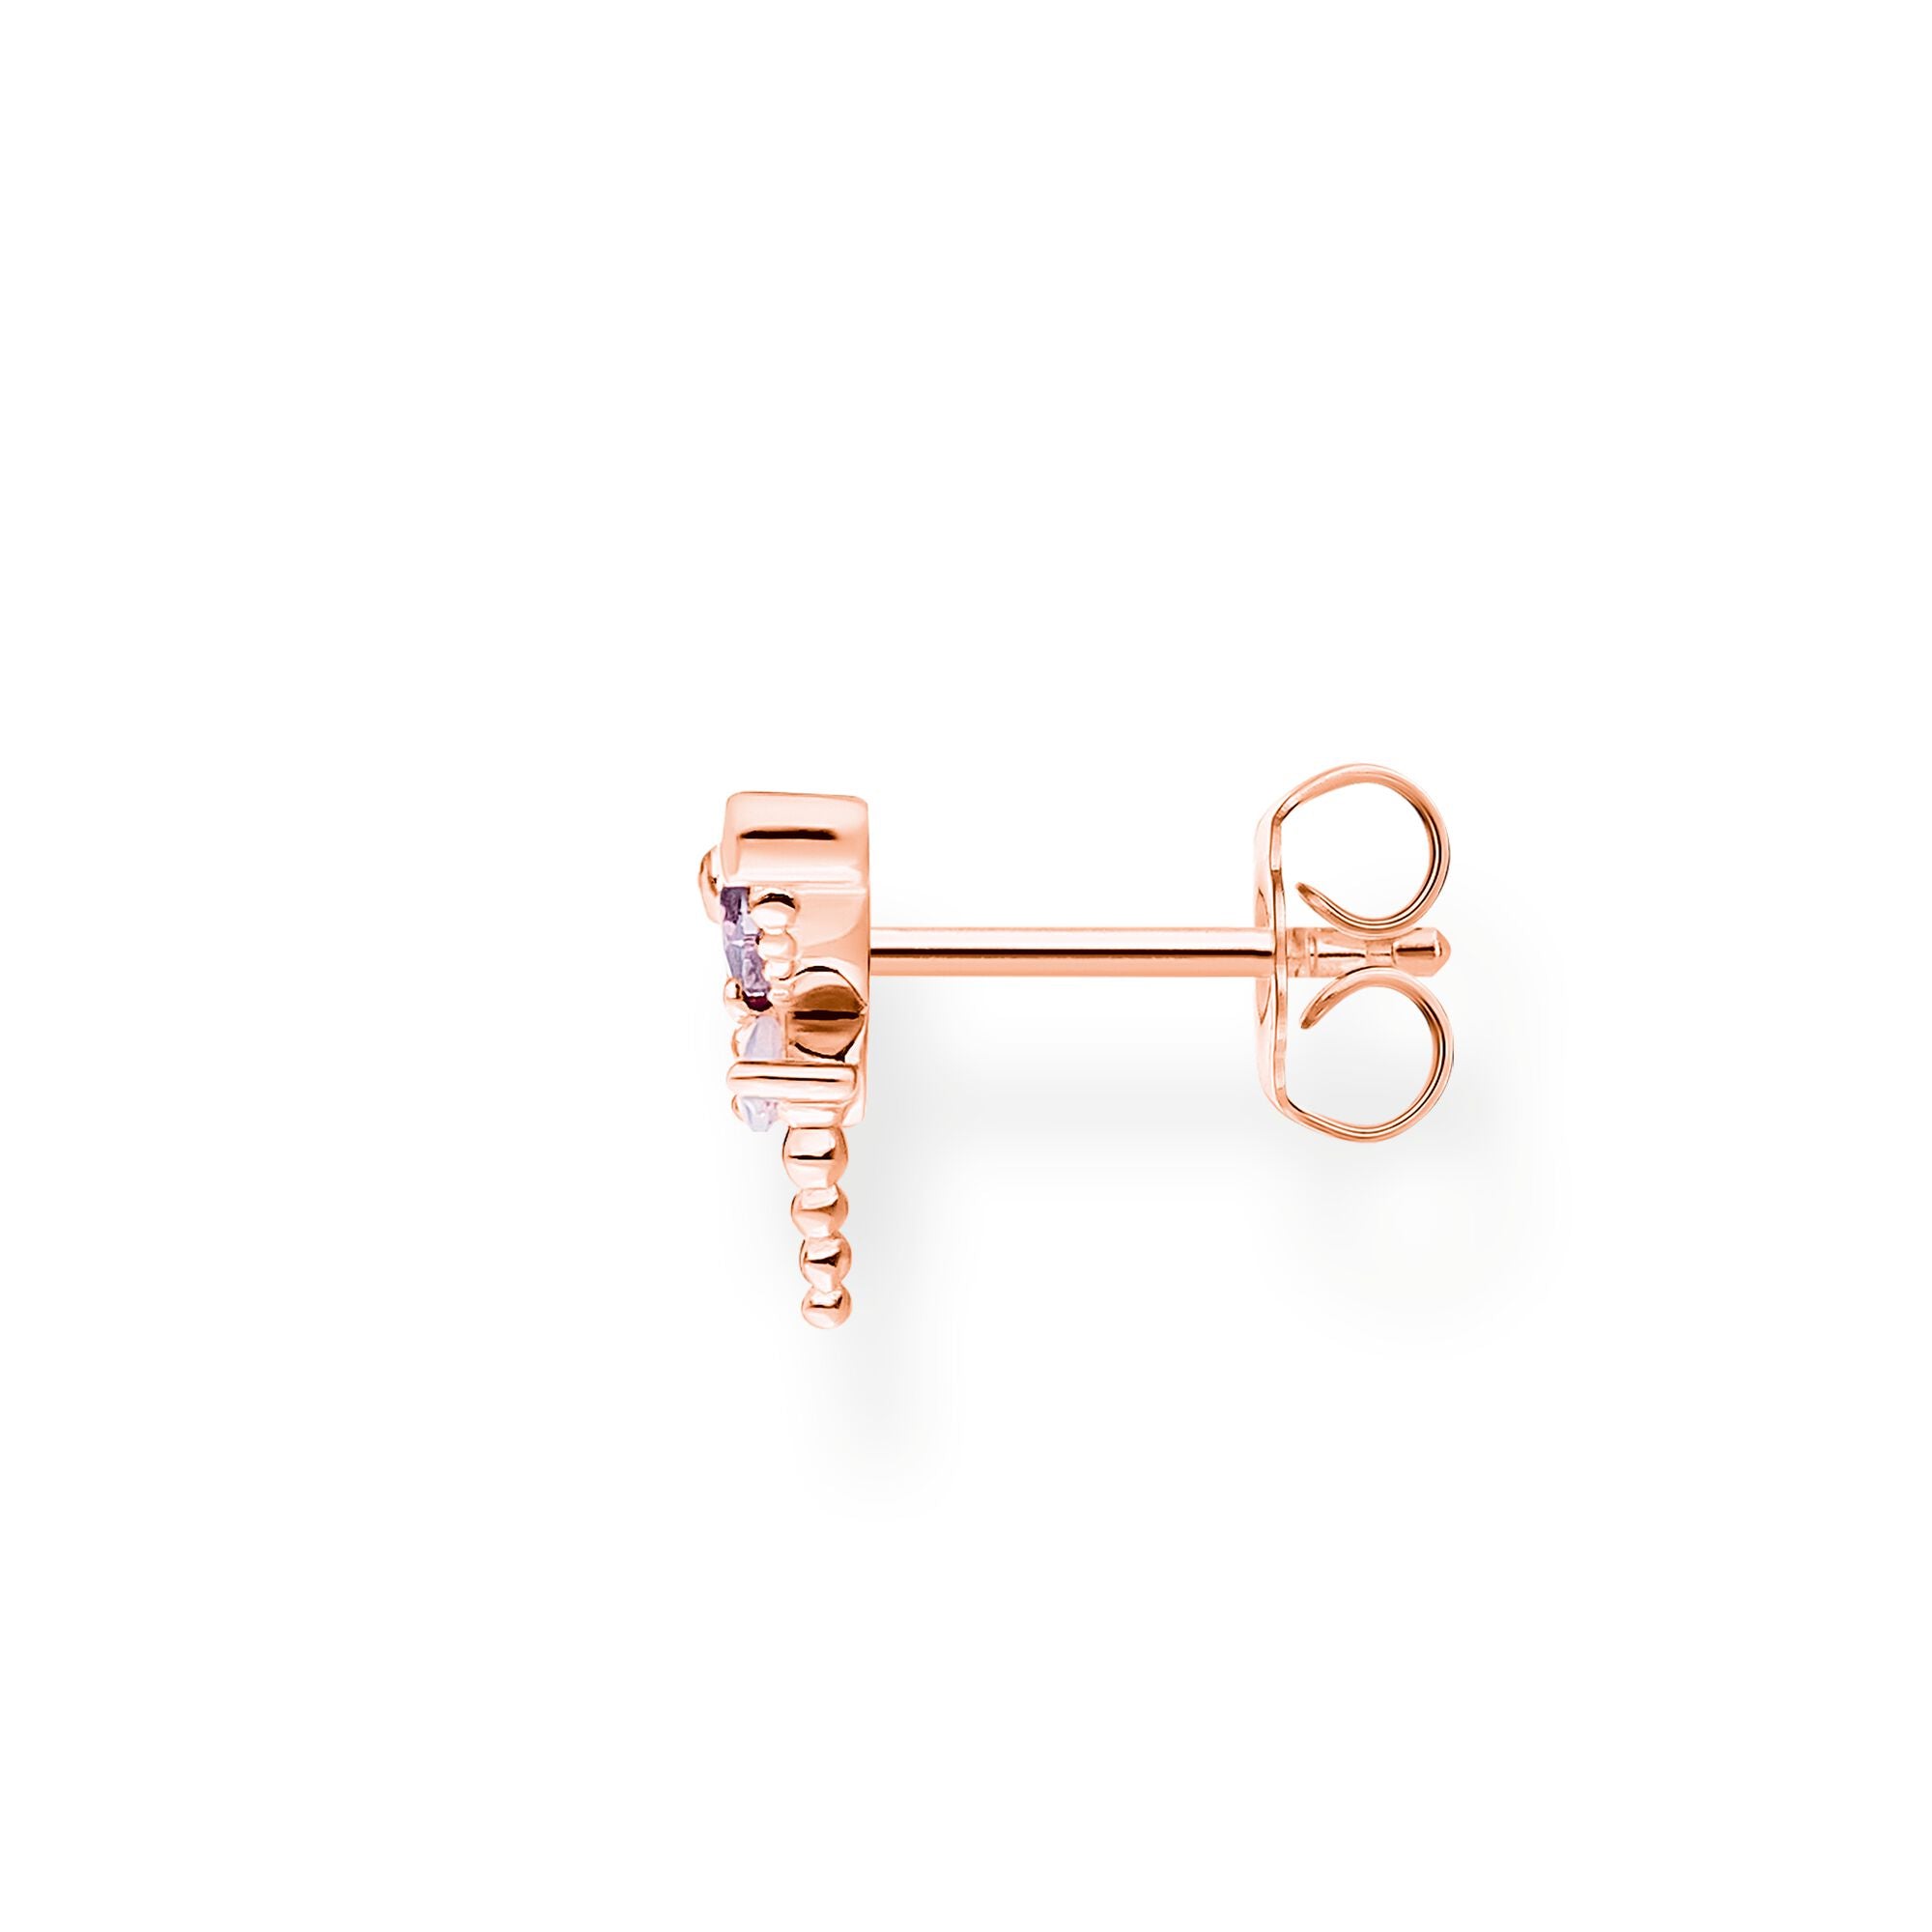 Thomas Sabo sterling silver 18k rose gold plated, pink stone dragonfly single stud earring